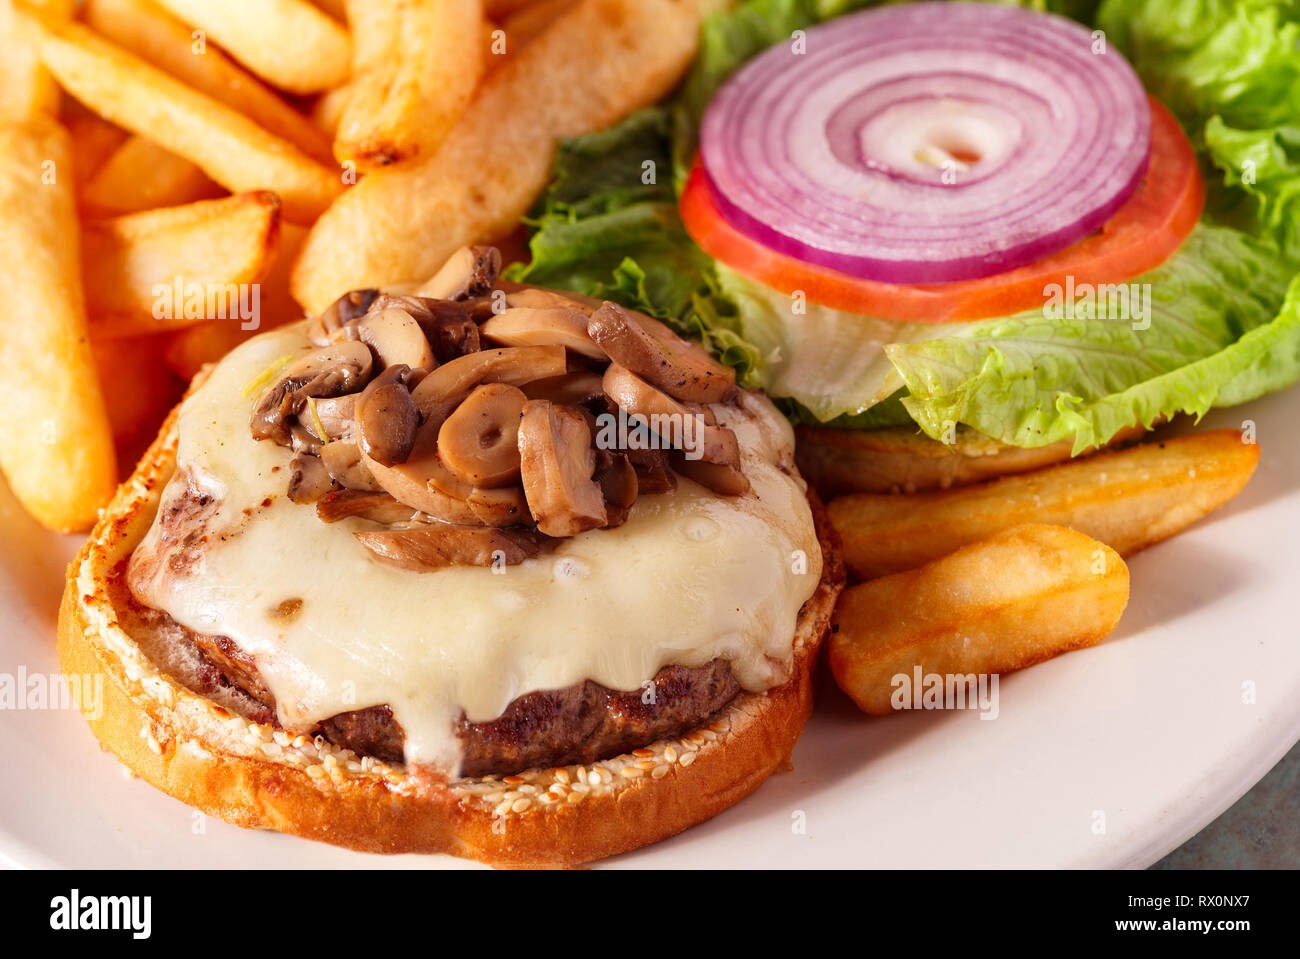 Mushroom Burger with French Fries Stock Photo